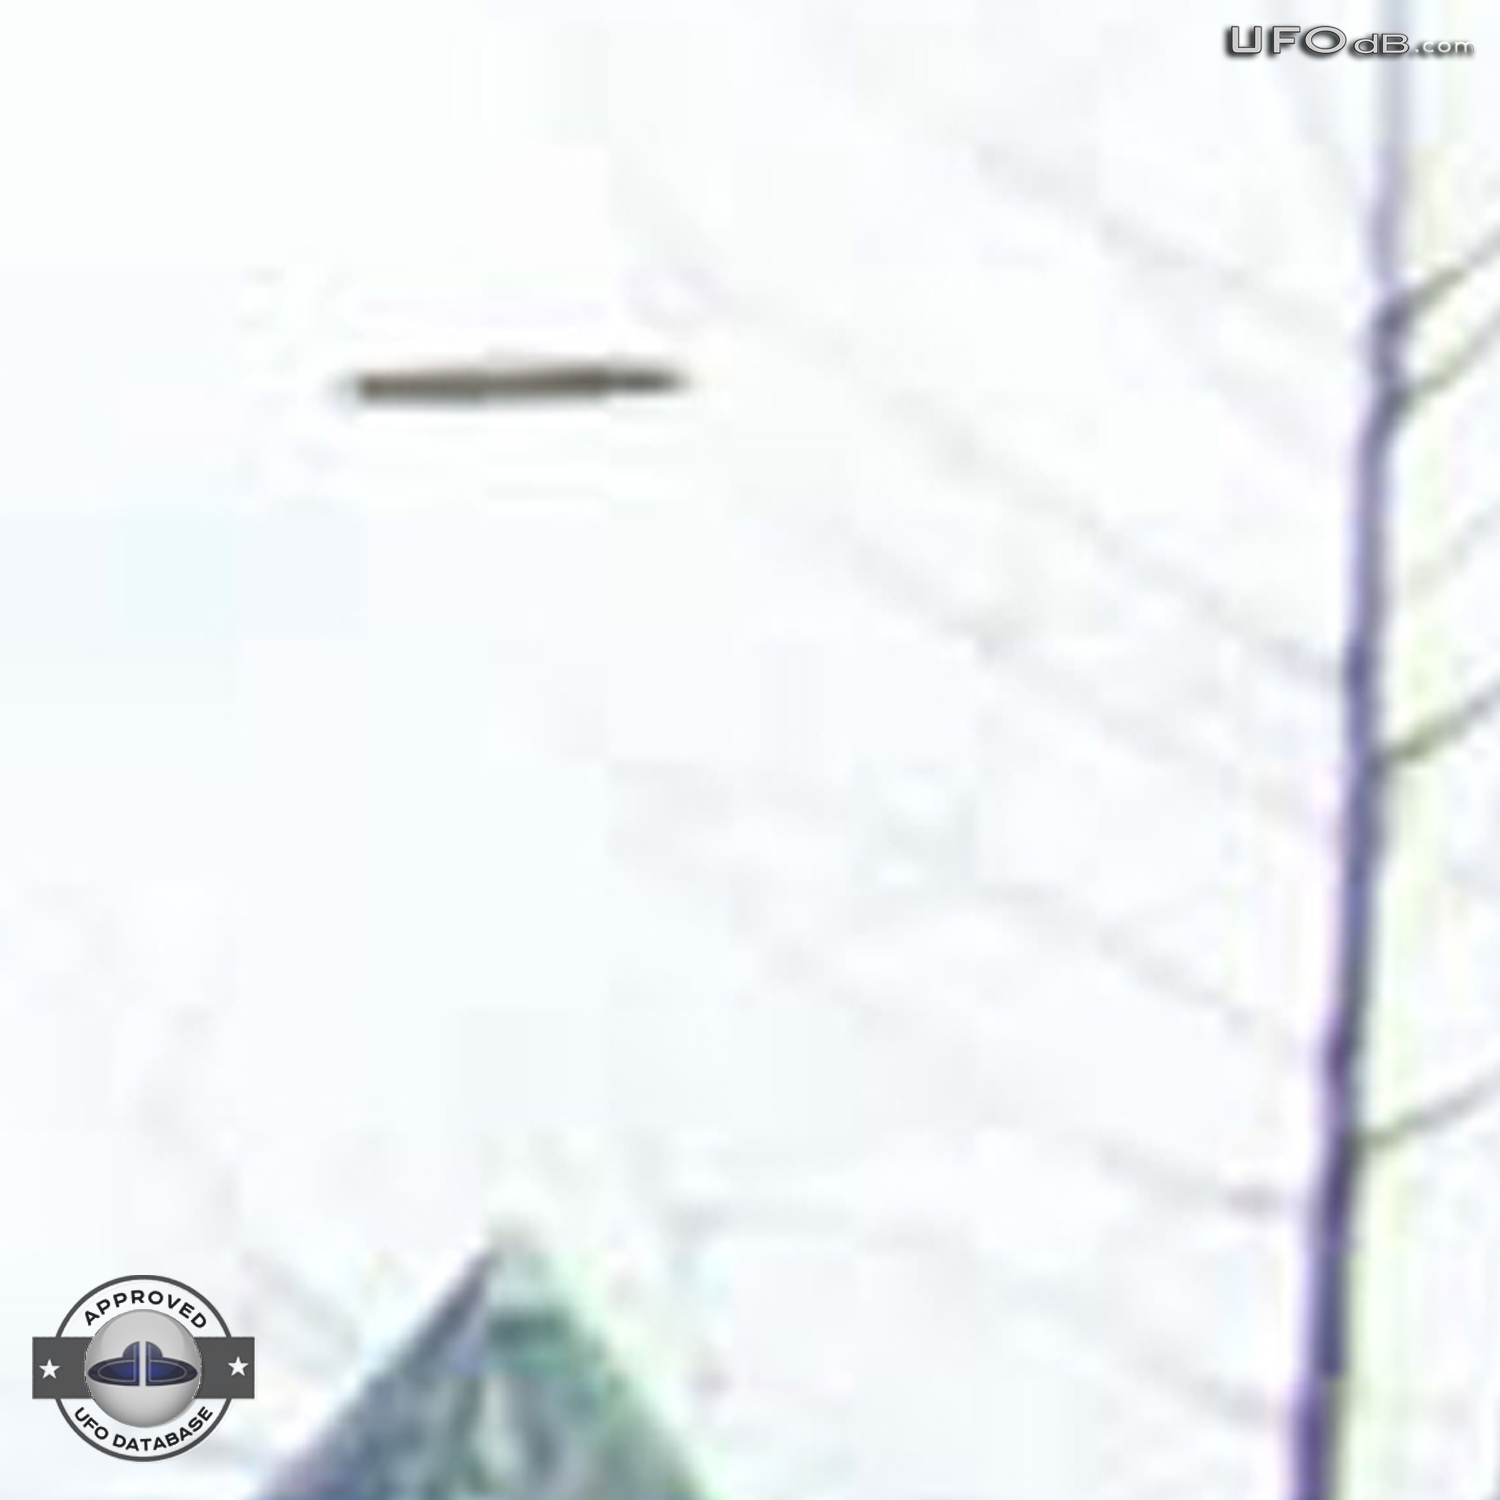 West Edmonton Mall visited by a UFO | Alberta, Canada | May 21 2011 UFO Picture #321-4